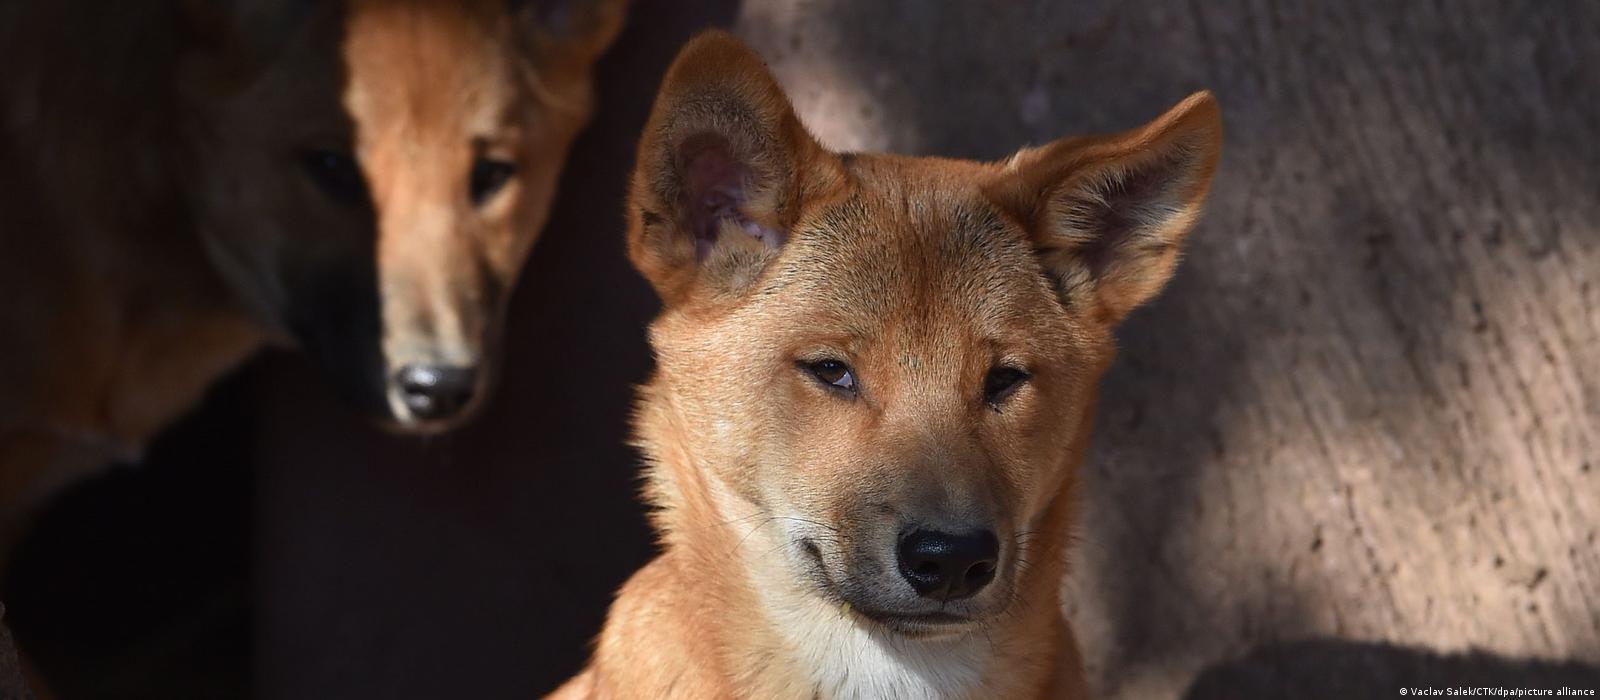 is dingo a dog breed